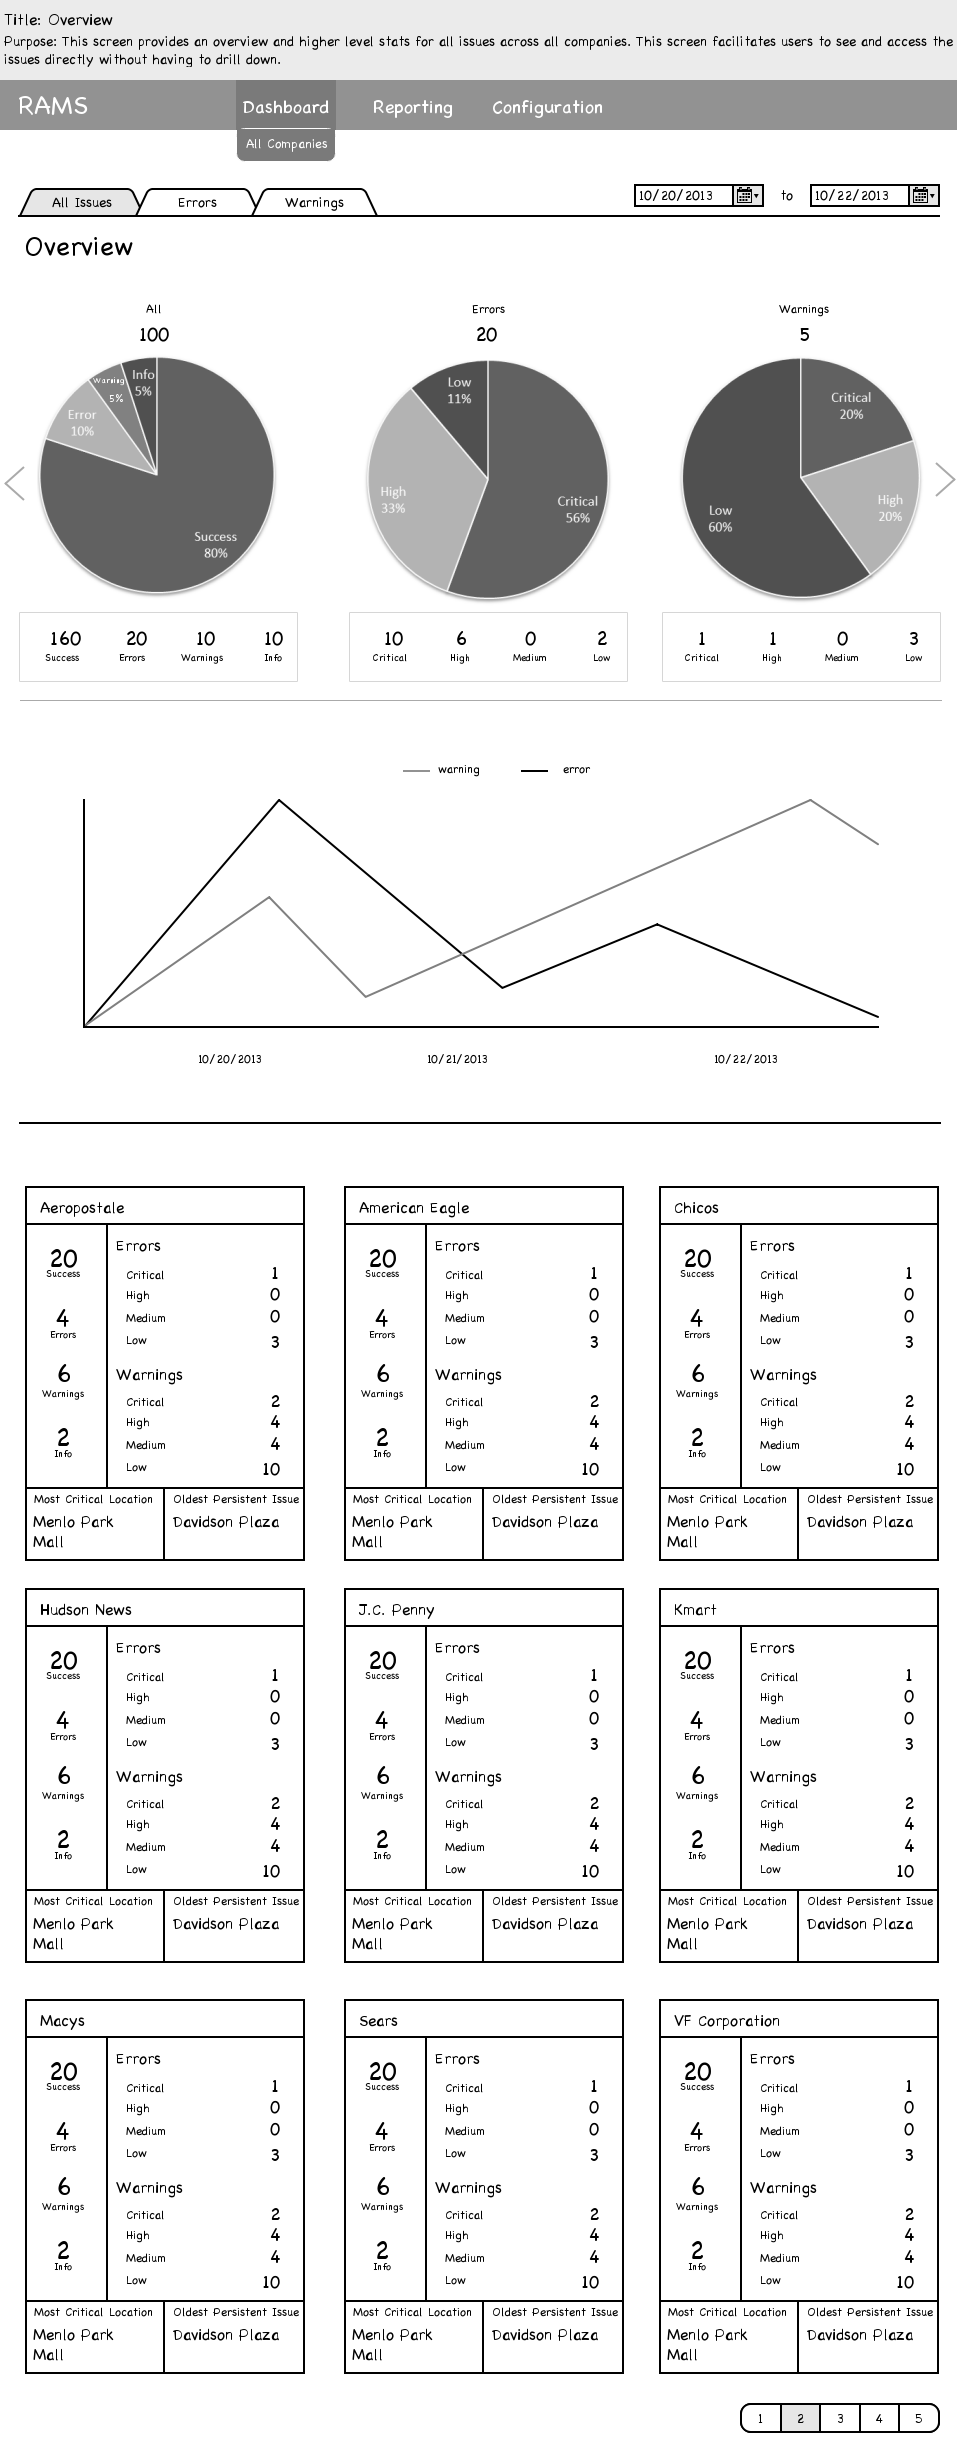 Epicor Crisis Management Dashboard - Overview Wireframe